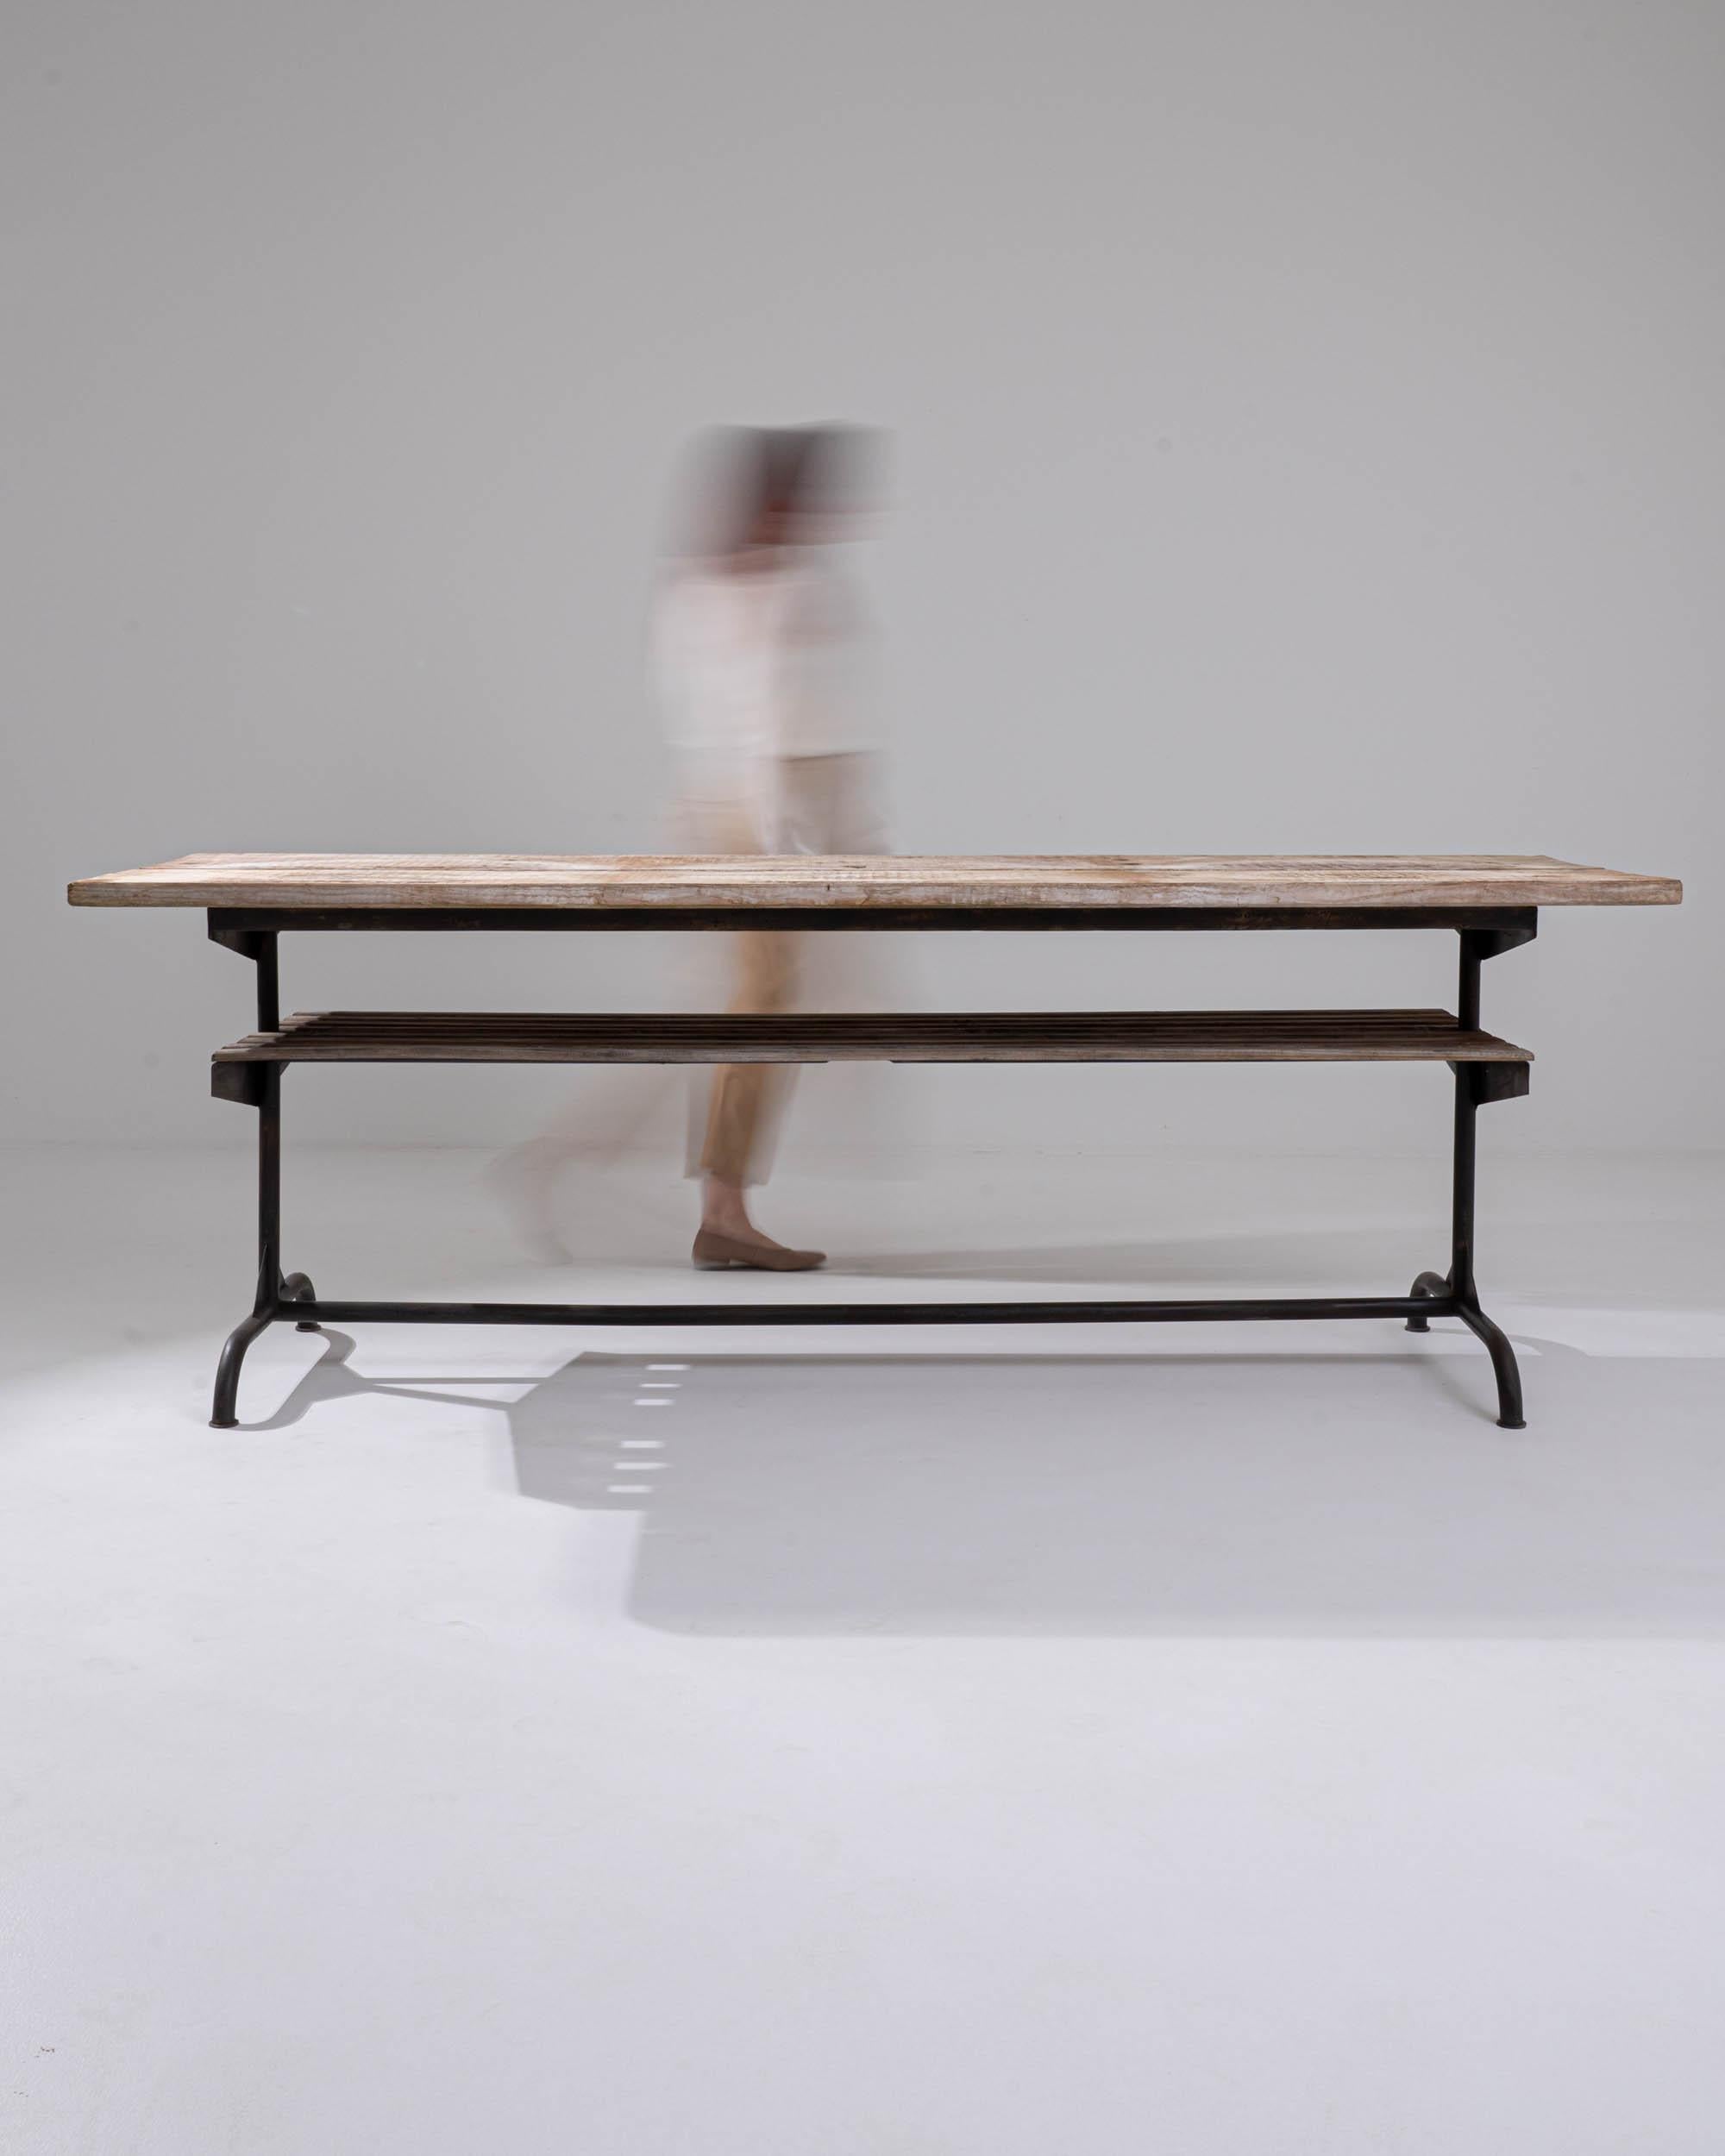 A metal table with a wooden top made in Central Europe, circa 1900. Welded metal tubes conjoin to form the legs, aprons, and stretcher of this table, upon which rests simple and eye-pleasing planks of wood. Composed with a lower shelf and a generous